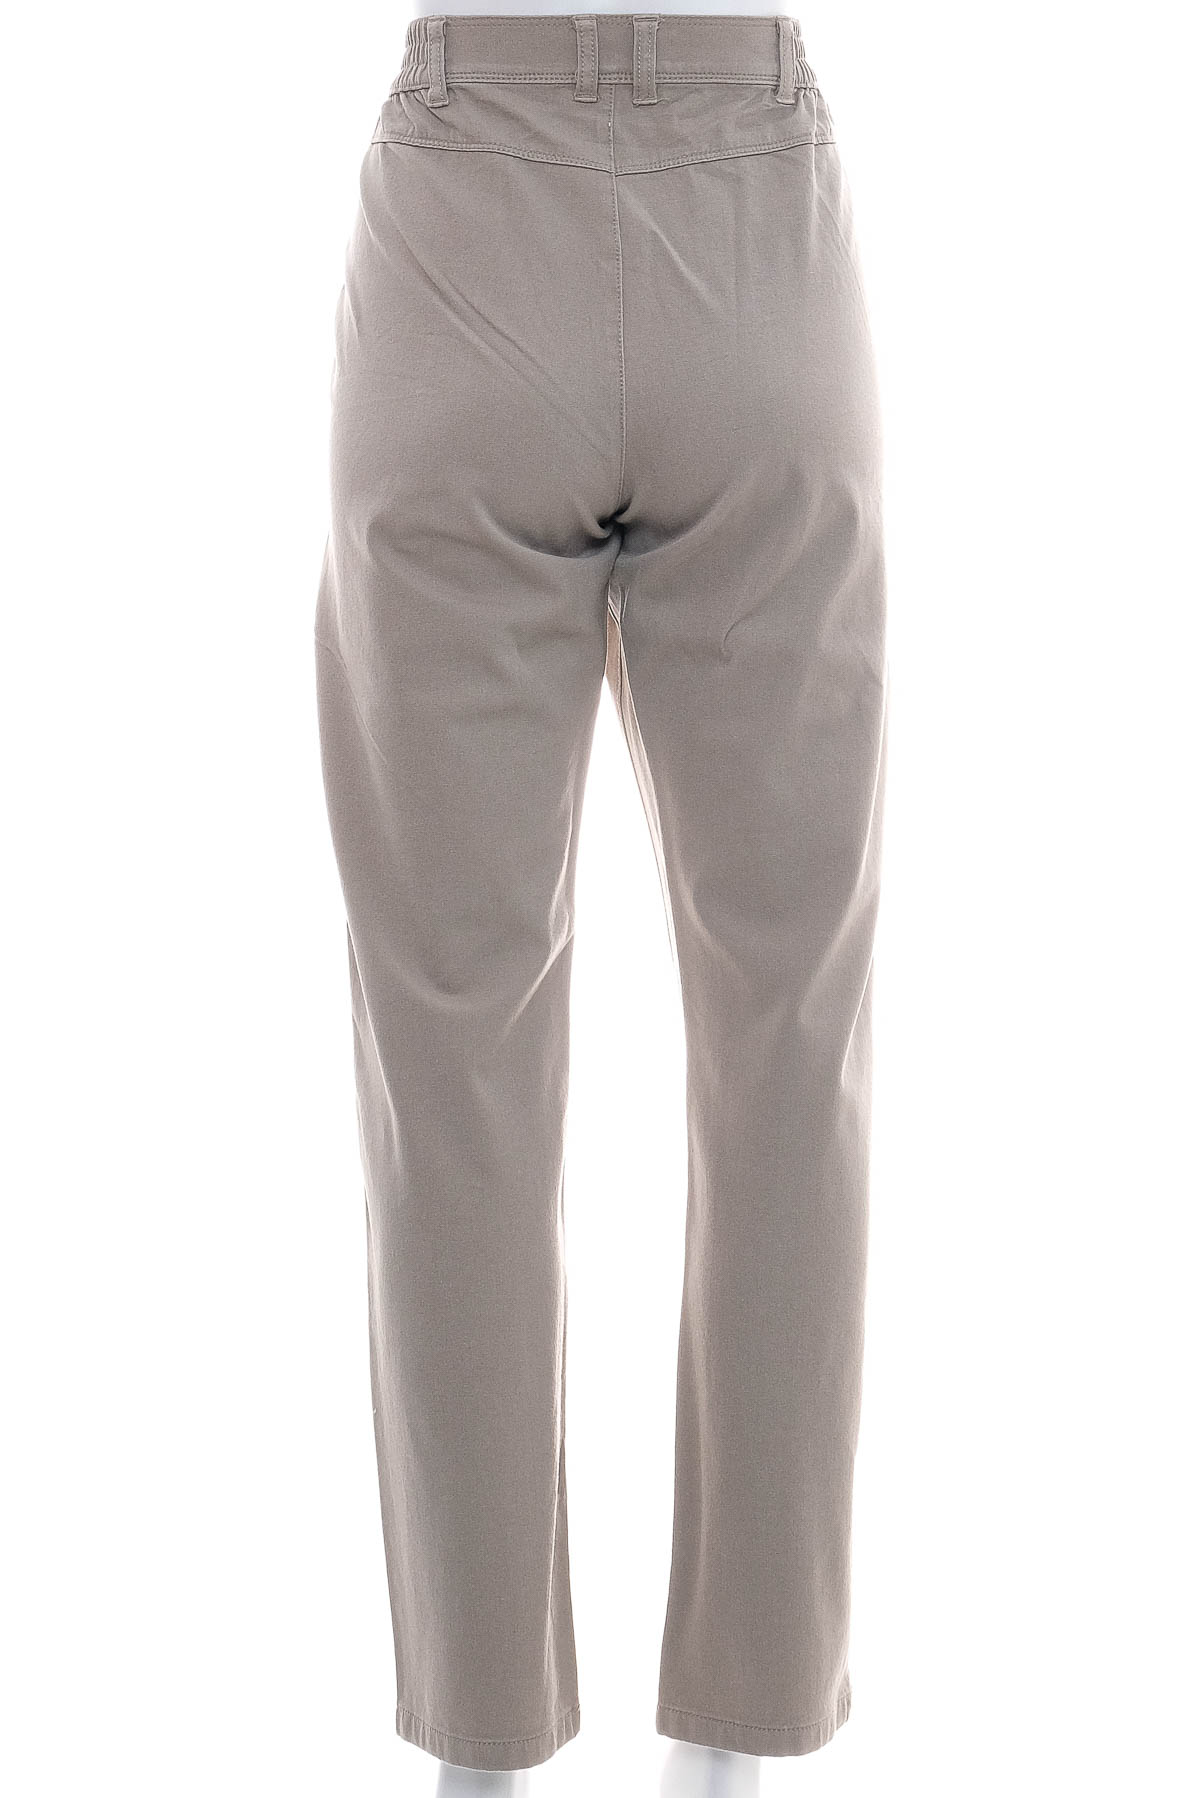 Women's trousers - Charles Vogele - 1